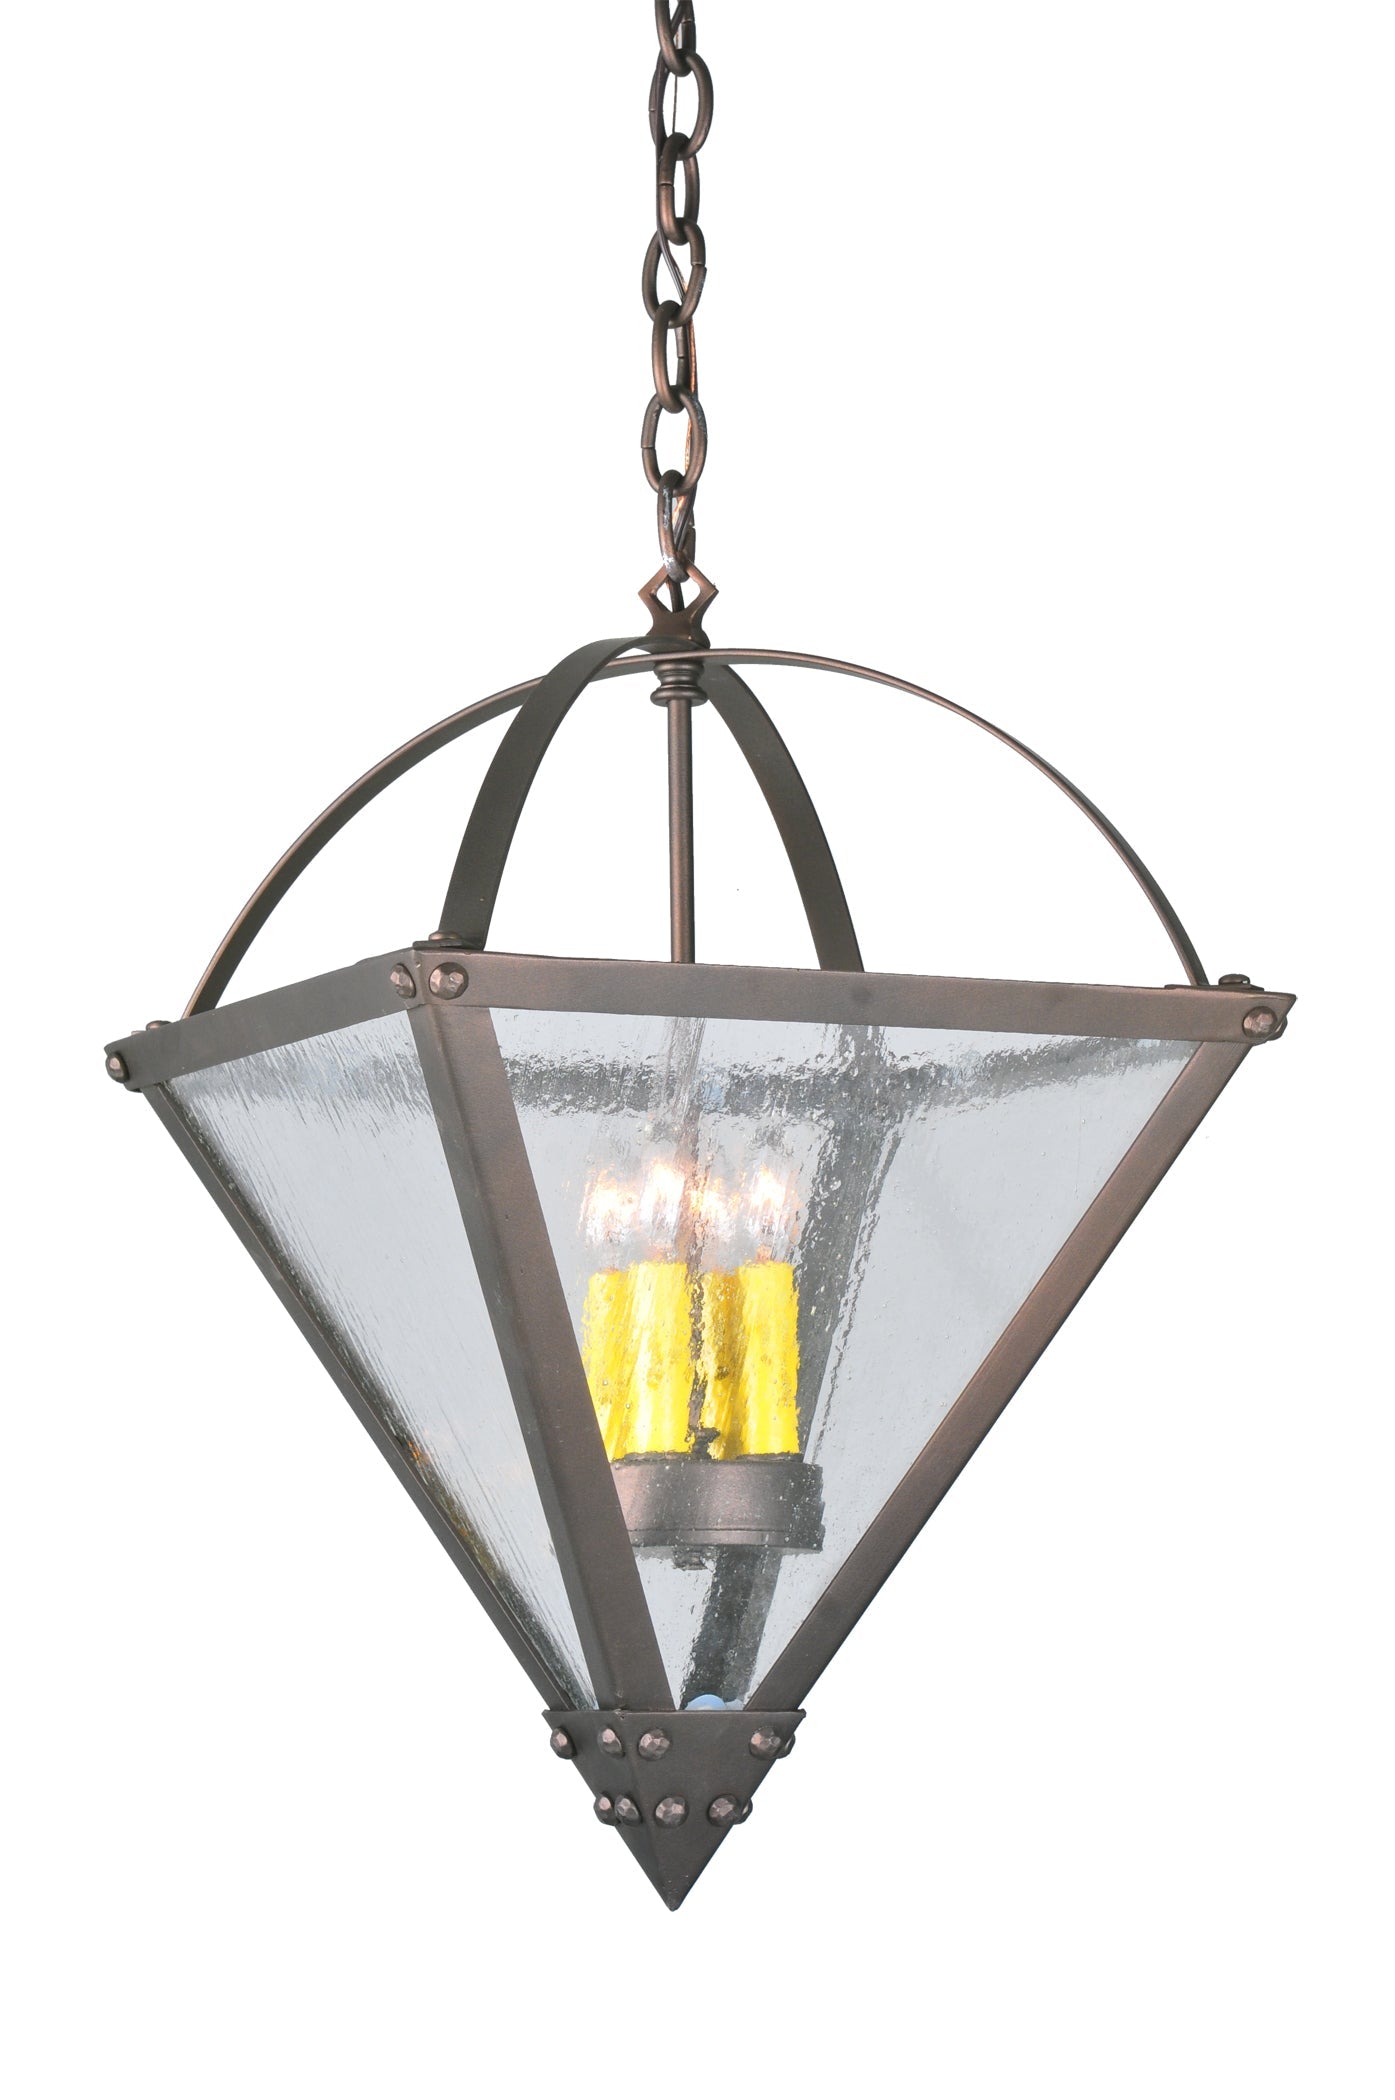 14" Square Pyramid Inverted Pendant by 2nd Ave Lighting